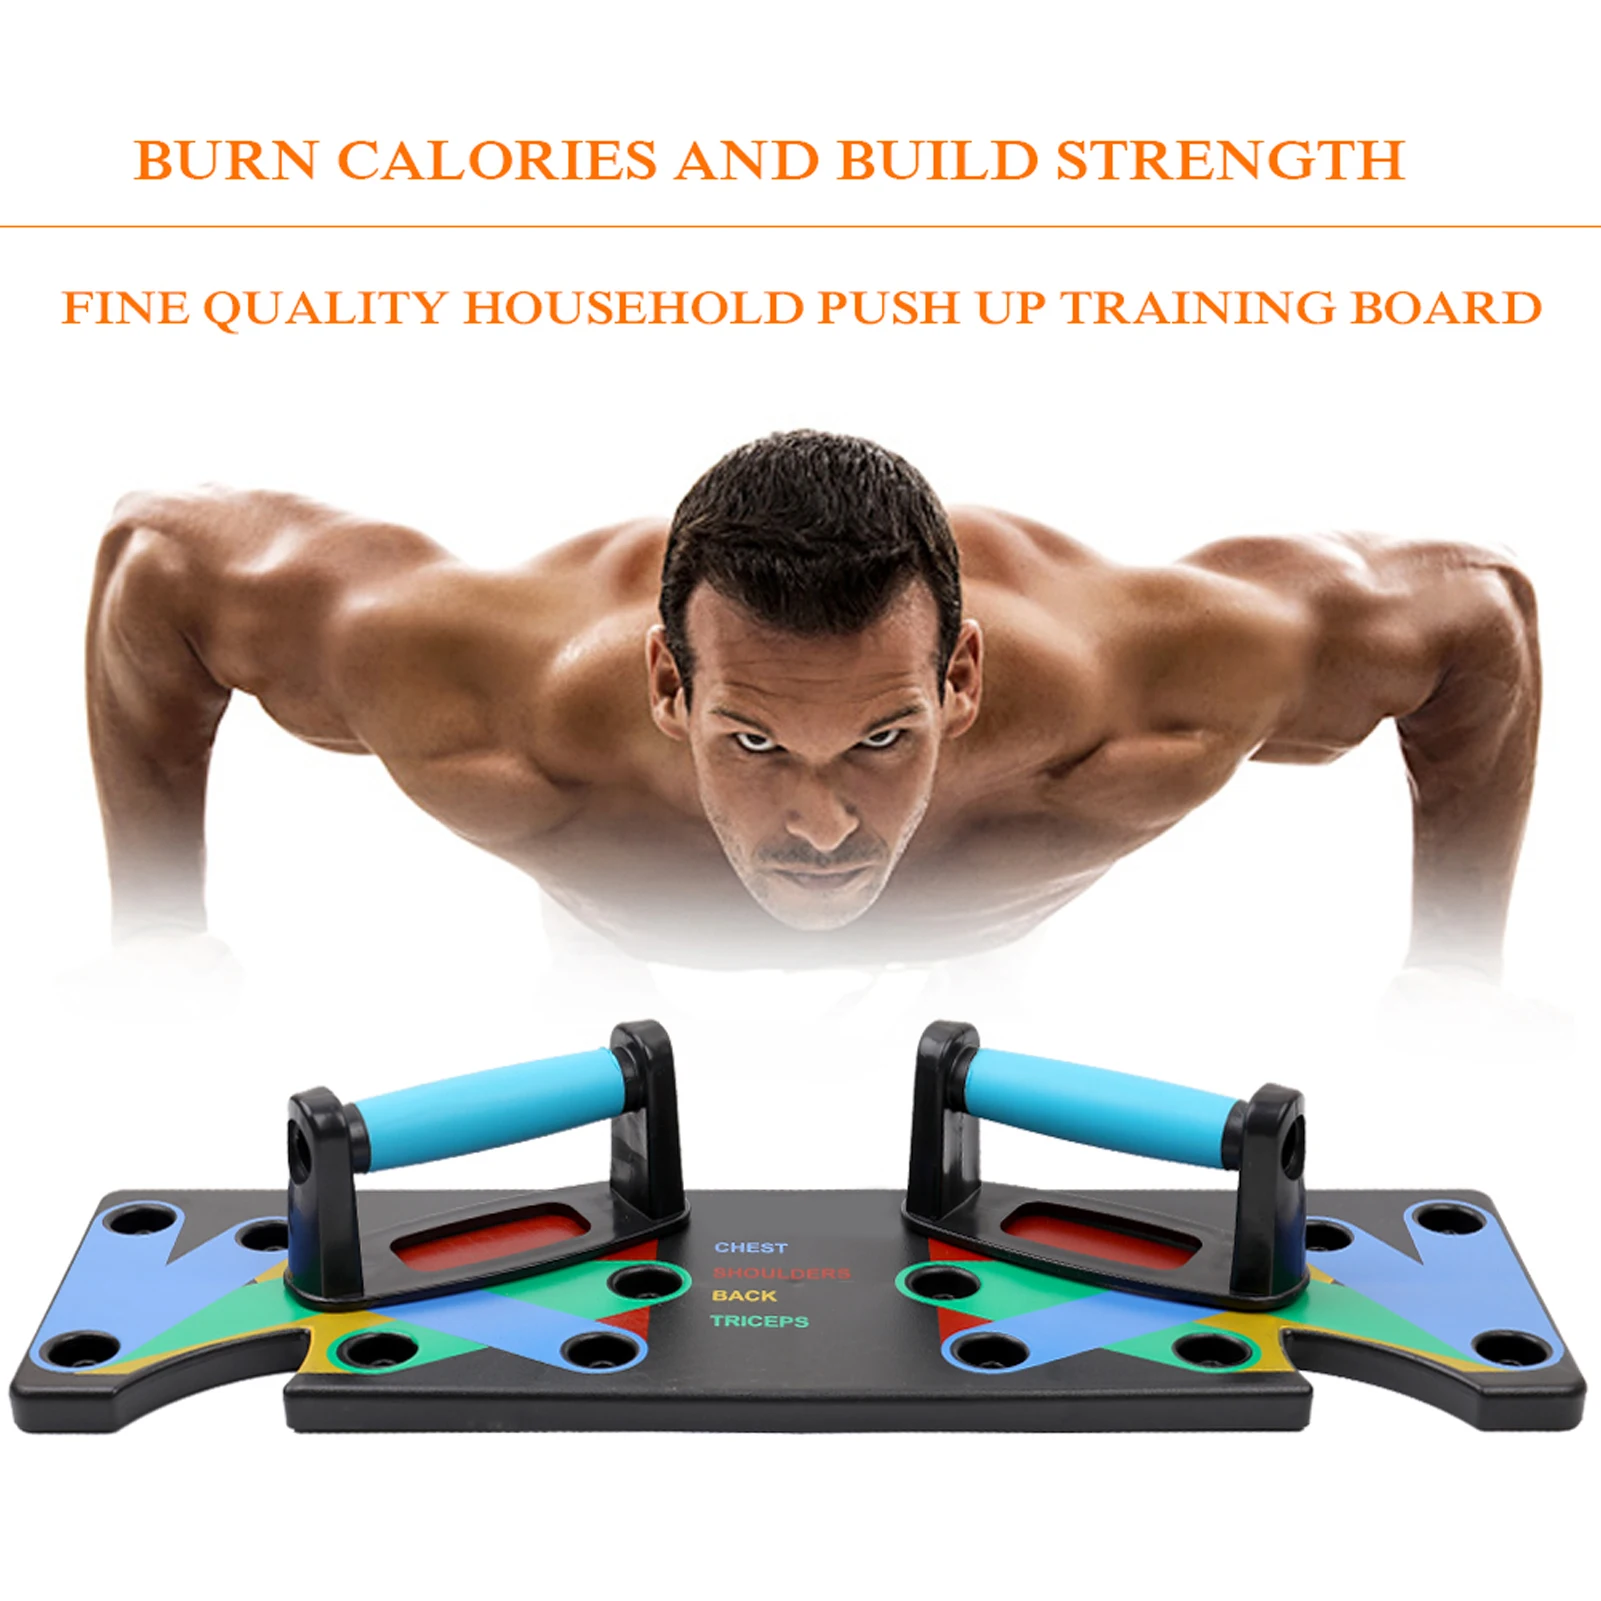 

Folding Push Up Board Smart Counting Abdominal Muscle Trainer Sports Home Fitness Equipment For Body Building Push-Ups Stands